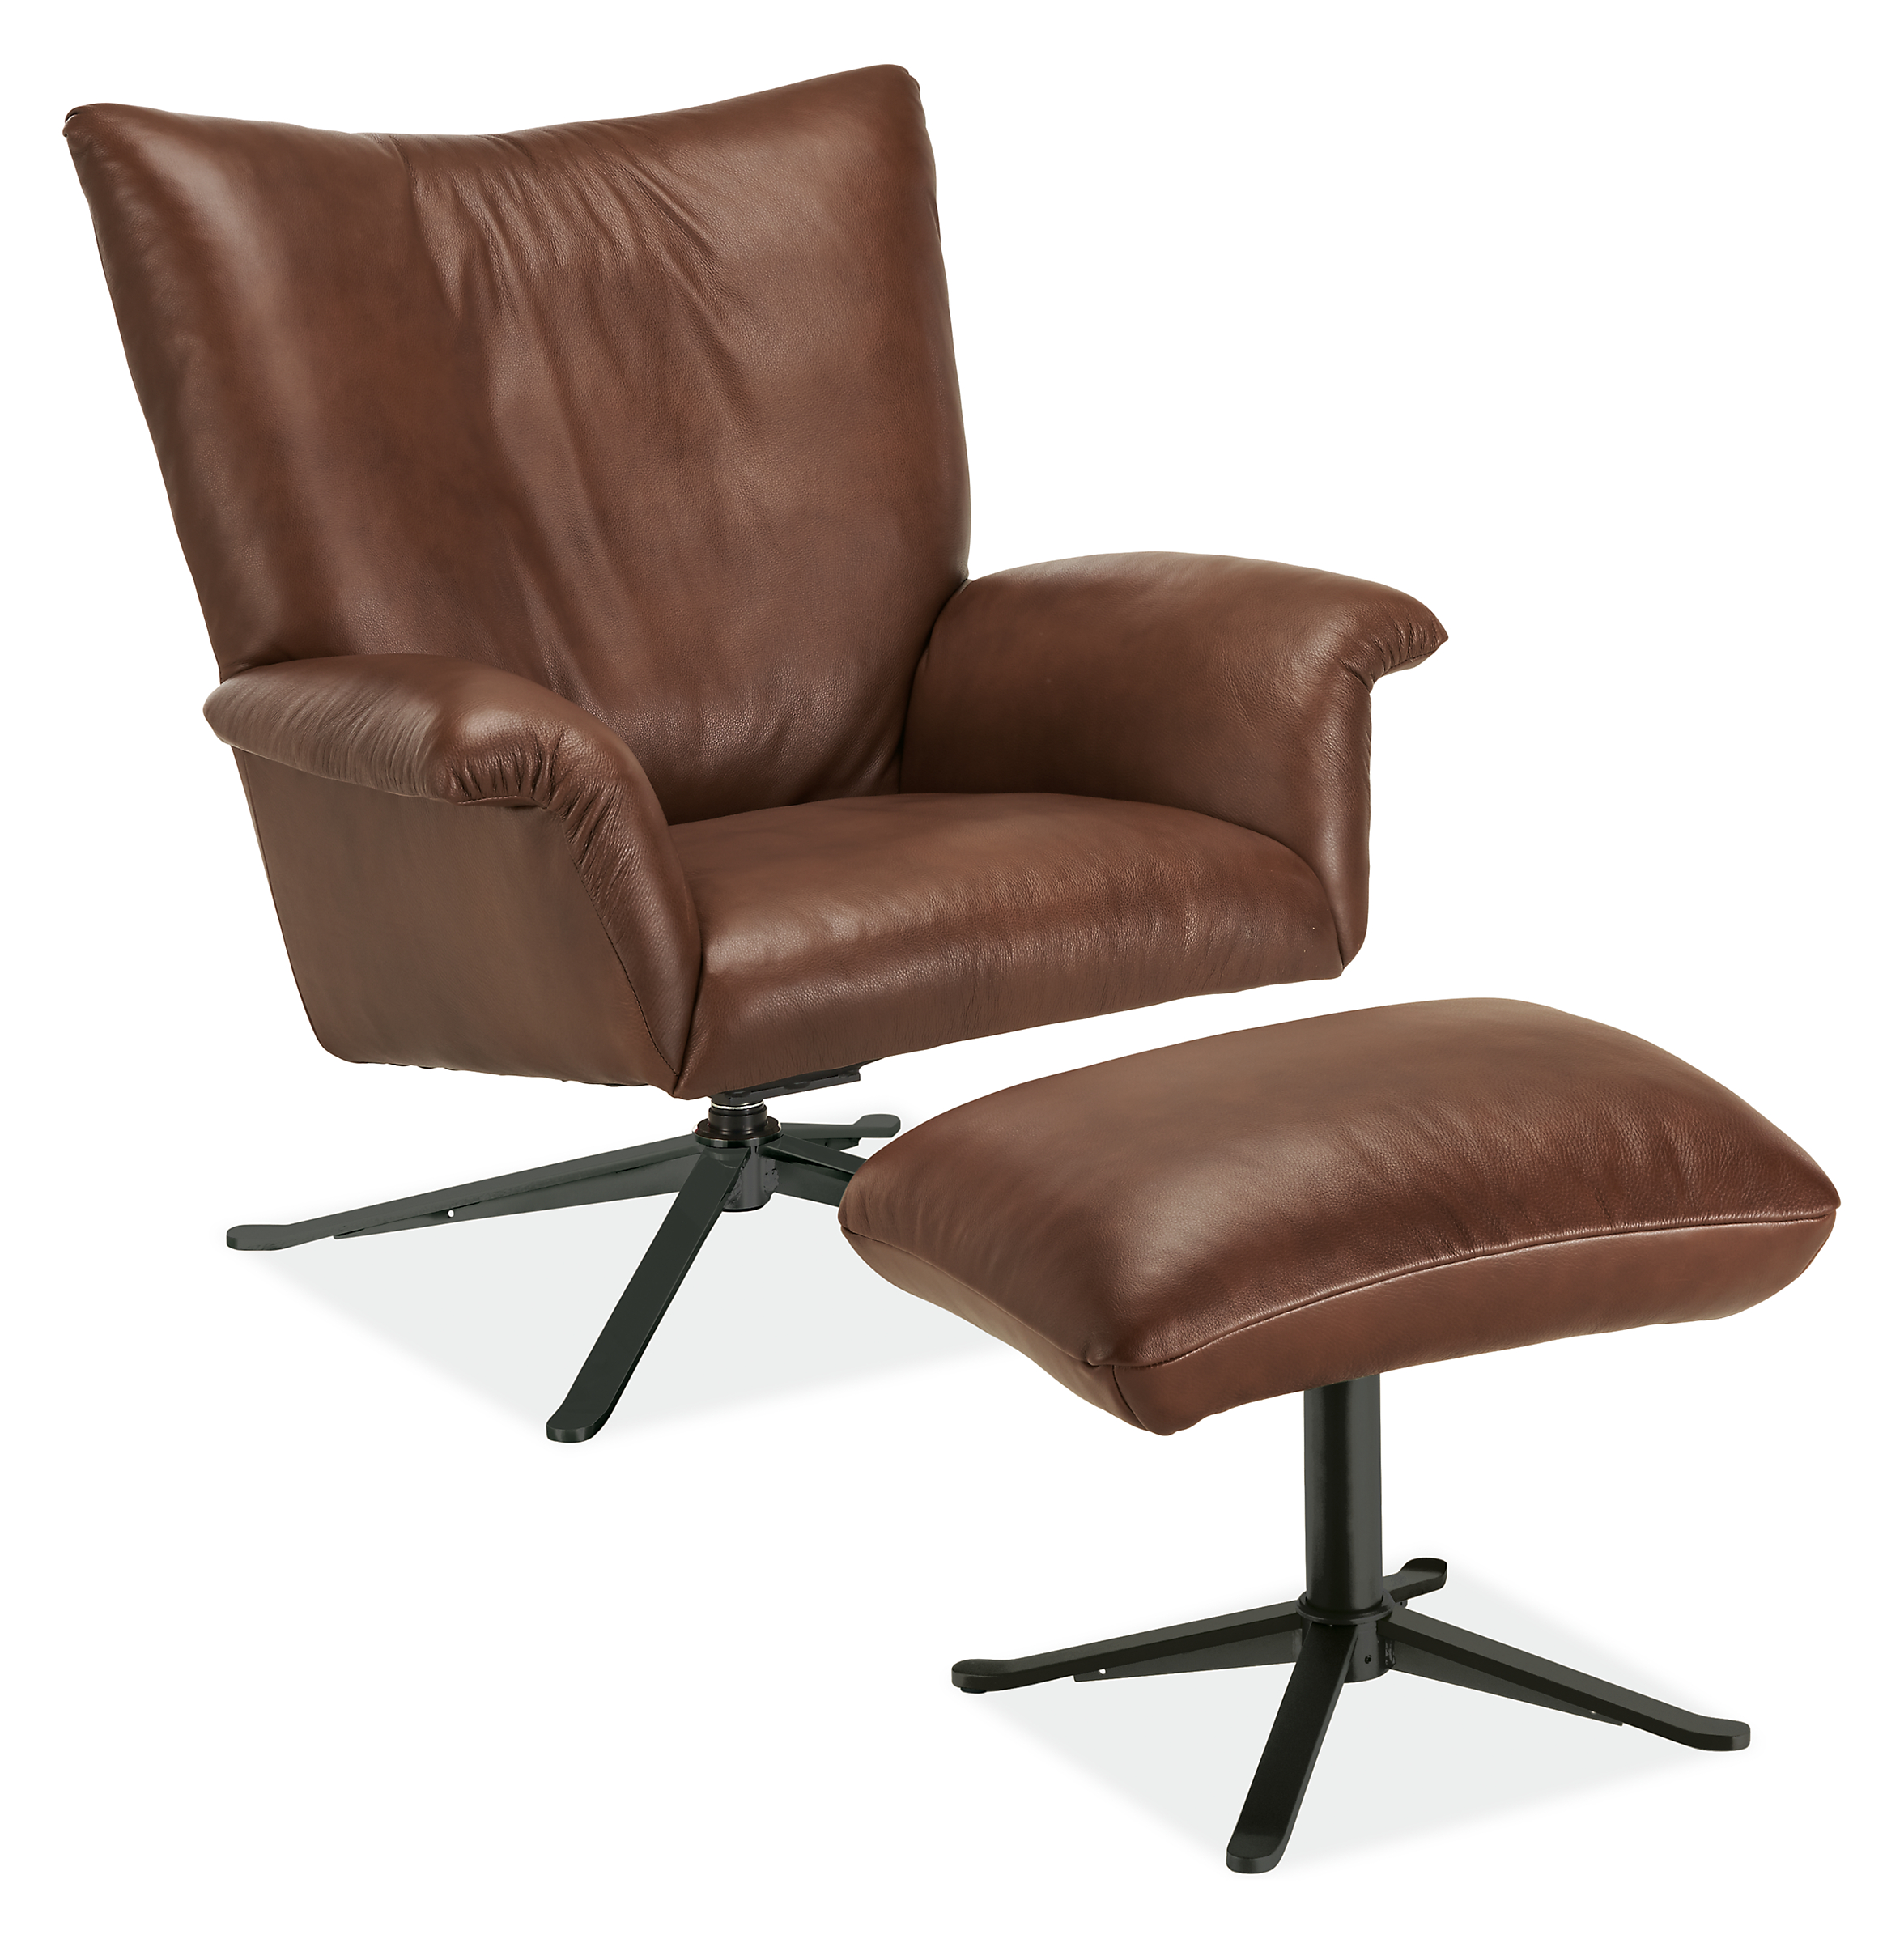 Paris Swivel Chair in Lecco Leather and Graphite.